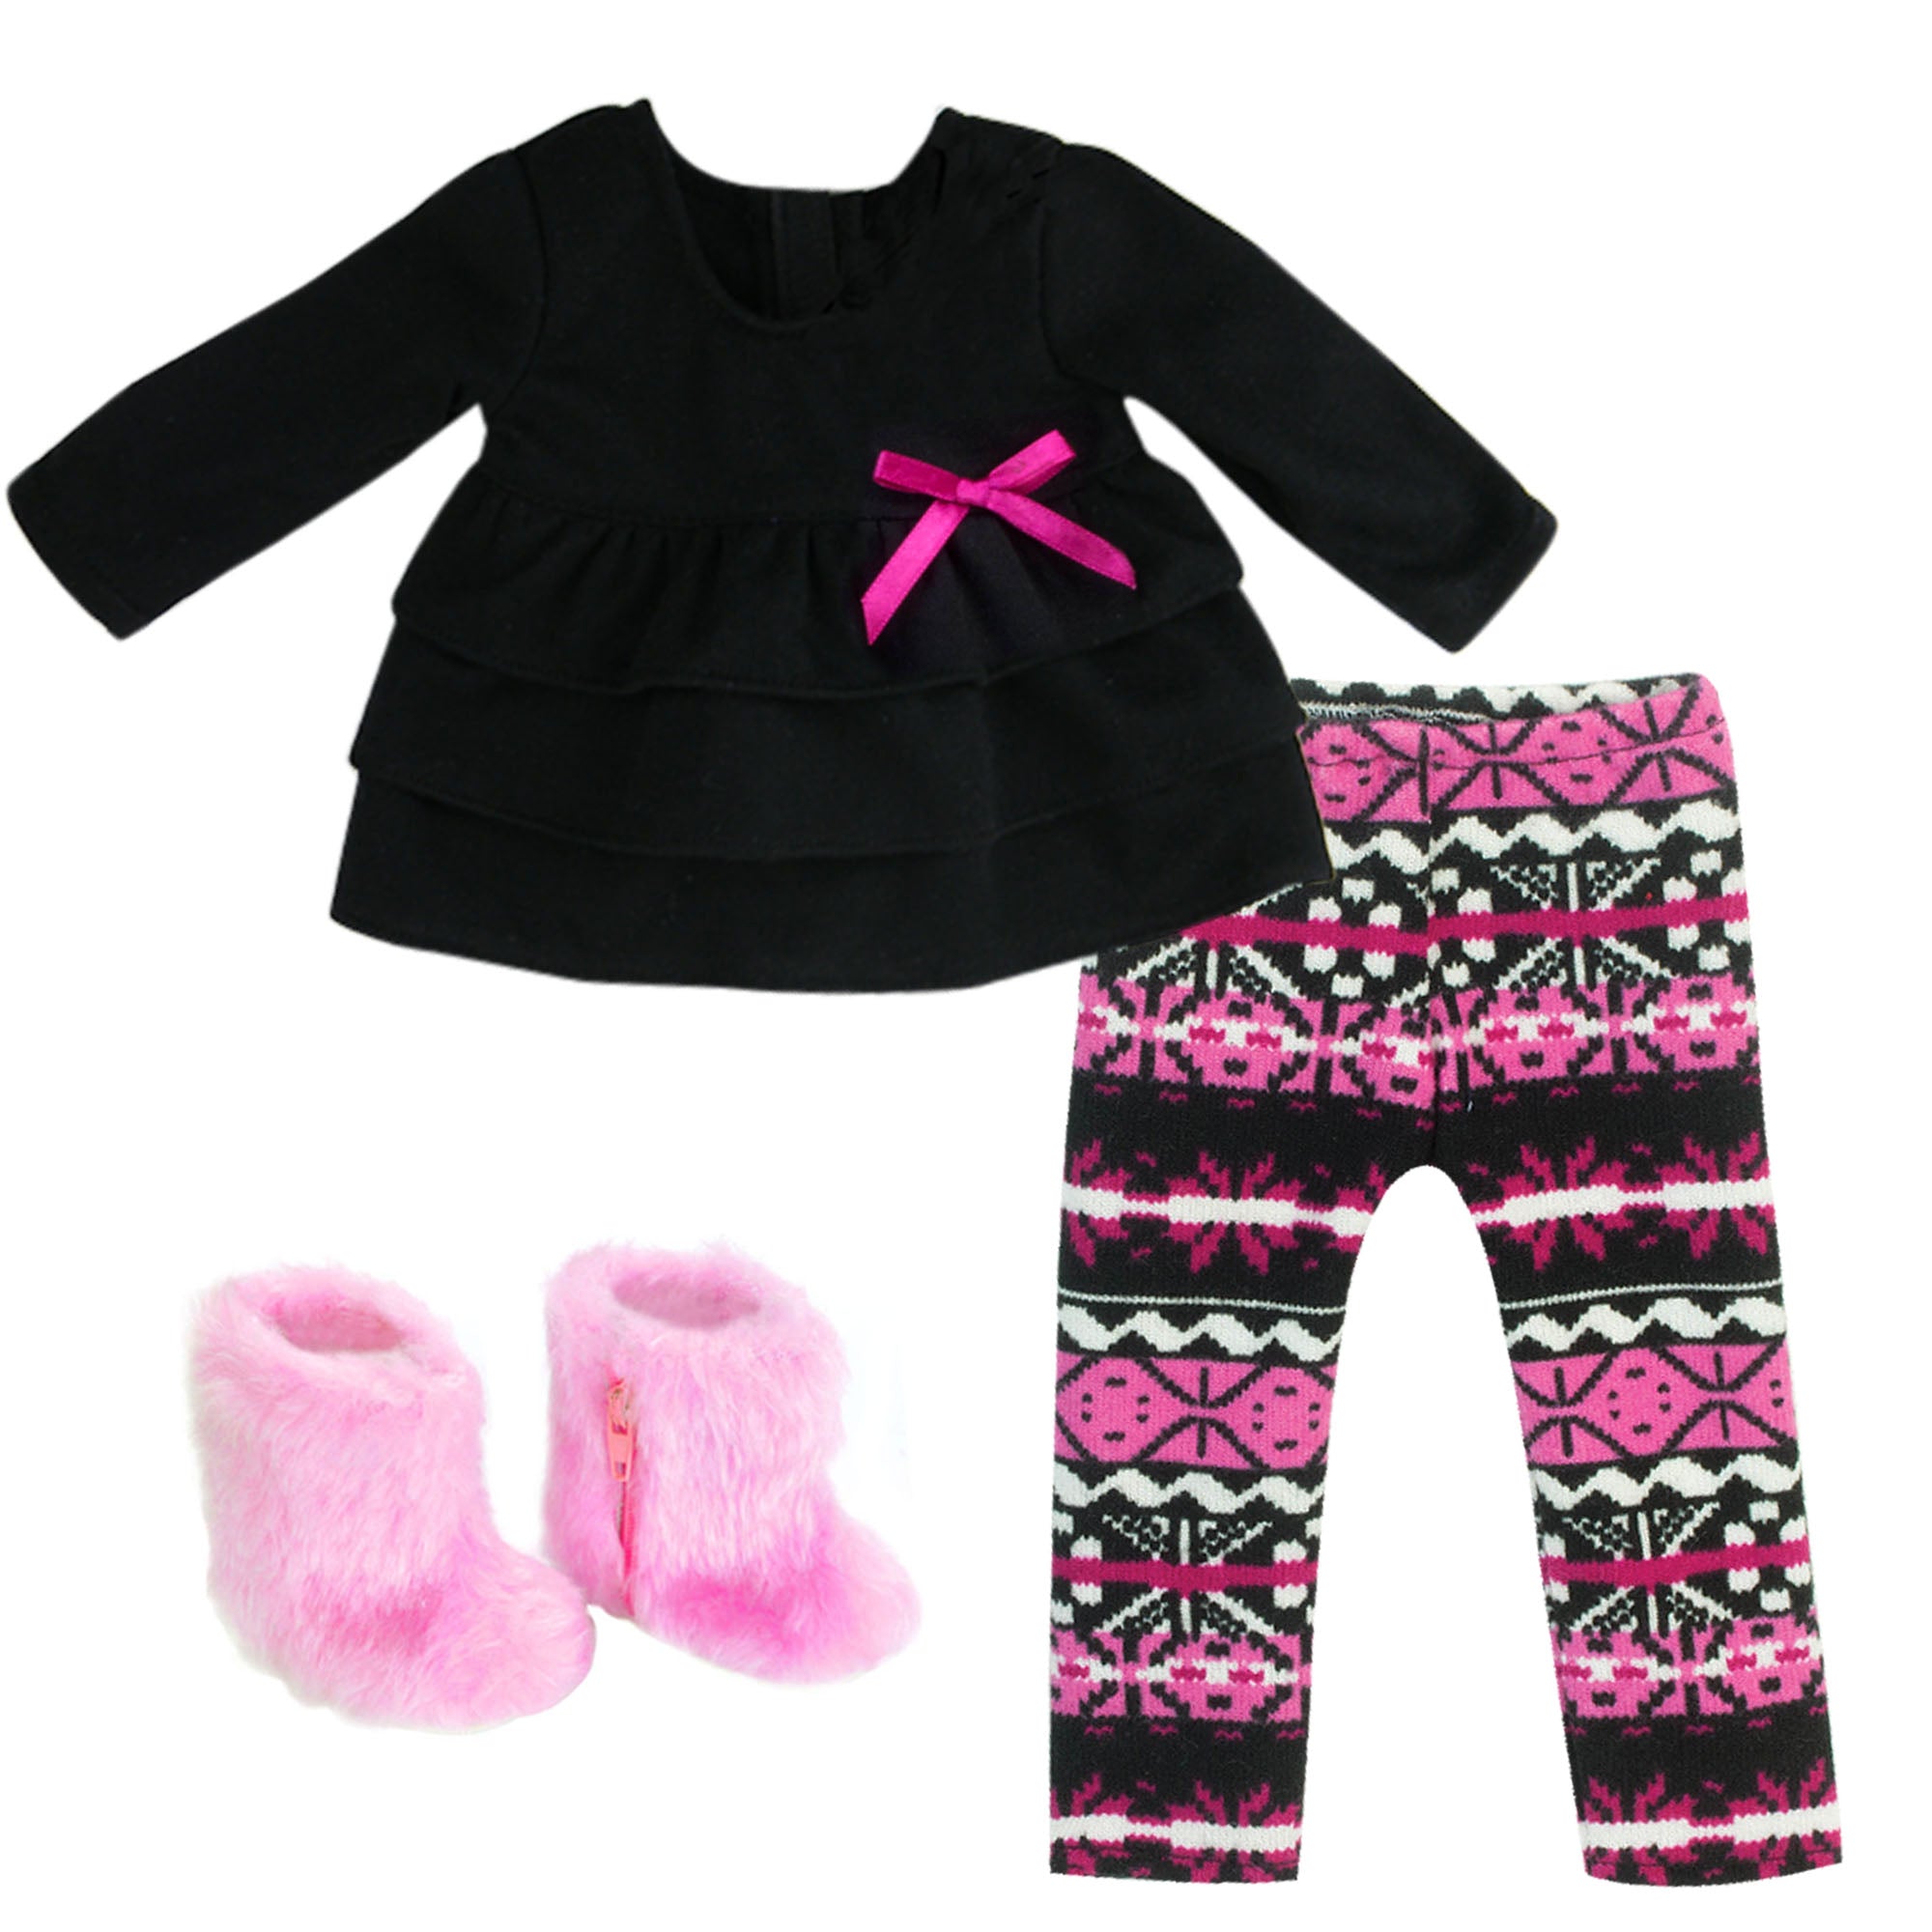 Sophia’s Mix & Match Ikat Print Knit Leggings, Long-Sleeved Ruffle Top, & Fuzzy Boots Complete Outfit Set for 18” Dolls, Hot Pink/Black